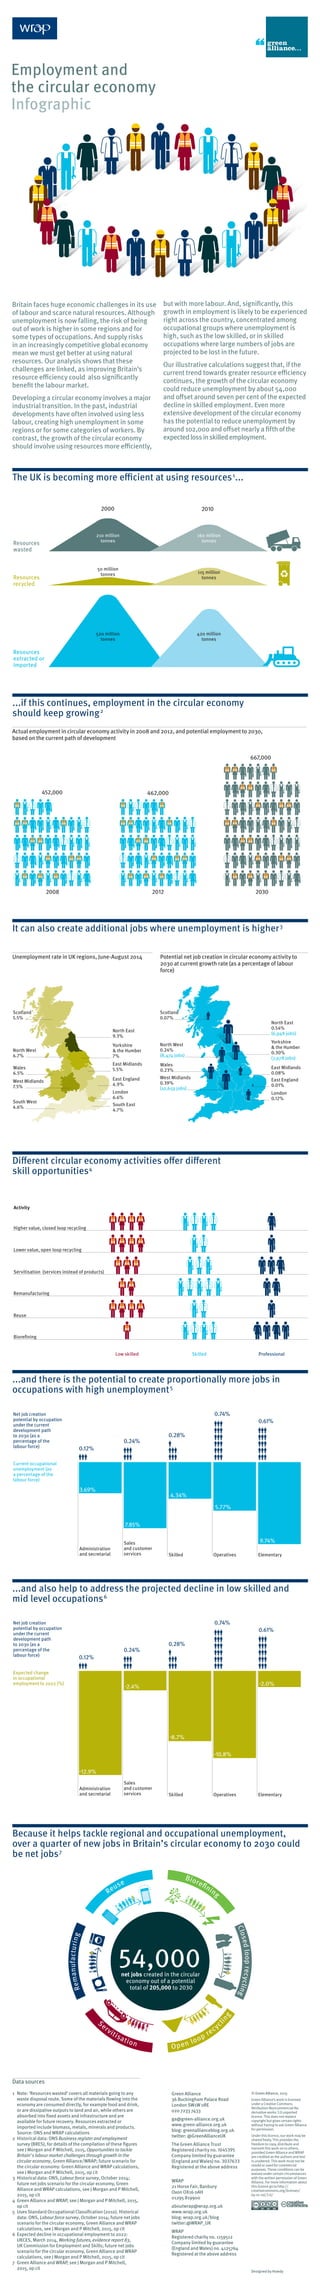 Britain faces huge economic challenges in its use
of labour and scarce natural resources. Although
unemployment is now falling, the risk of being
out of work is higher in some regions and for
some types of occupations. And supply risks
in an increasingly competitive global economy
mean we must get better at using natural
resources. Our analysis shows that these
challenges are linked, as improving Britain’s
resource efficiency could also significantly
benefit the labour market.
Developing a circular economy involves a major
industrial transition. In the past, industrial
developments have often involved using less
labour, creating high unemployment in some
regions or for some categories of workers. By
contrast, the growth of the circular economy
should involve using resources more efficiently,
but with more labour. And, significantly, this
growth in employment is likely to be experienced
right across the country, concentrated among
occupational groups where unemployment is
high, such as the low skilled, or in skilled
occupations where large numbers of jobs are
projected to be lost in the future.
Our illustrative calculations suggest that, if the
current trend towards greater resource efficiency
continues, the growth of the circular economy
could reduce unemployment by about 54,000
and offset around seven per cent of the expected
decline in skilled employment. Even more
extensive development of the circular economy
has the potential to reduce unemployment by
around 102,000 and offset nearly a fifth ofthe
expectedlossinskilledemployment.
The UK is becoming more efficient at using resources1
...
Employment and
the circular economy
Infographic
...if this continues, employment in the circular economy
should keep growing2
It can also create additional jobs where unemployment is higher3
...and there is the potential to create proportionally more jobs in
occupations with high unemployment5
...and also help to address the projected decline in low skilled and
mid level occupations6
Because it helps tackle regional and occupational unemployment,
over a quarter of new jobs in Britain’s circular economy to 2030 could
be net jobs7
Different circular economy activities offer different
skill opportunities4
2000 2010
520 million
tonnes
420 million
tonnes
50 million
tonnes
Resources
wasted
Resources
recycled
Resources
extracted or
imported
115 million
tonnes
210 million
tonnes
160 million
tonnes
Actual employment in circular economy activity in 2008 and 2012, and potential employment to 2030,
based on the current path of development
2008 2012 2030
452,000 462,000
667,000
Unemployment rate in UK regions, June-August 2014 Potential net job creation in circular economy activity to
2030 at current growth rate (as a percentage of labour
force)
Scotland
5.5%
East England
4.9%
London
6.6%
East Midlands
5.5%
Yorkshire
& the Humber
7%
West Midlands
7.5%
Wales
6.5%
North West
6.7%
North East
9.3%
South East
4.7%
South West
4.6%
Scotland
0.07%
West Midlands
0.39%
(10,659 jobs)
Wales
0.23%
North West
0.24%
(8,474 jobs)
East England
0.01%
London
0.12%
East Midlands
0.08%
Yorkshire
& the Humber
0.30%
(7,978 jobs)
North East
0.54%
(6,948 jobs)
Current occupational
unemployment (as
a percentage of the
labour force)
Expected change
in occupational
employment to 2022 (%)
Net job creation
potential by occupation
under the current
development path
to 2030 (as a
percentage of the
labour force)
Net job creation
potential by occupation
under the current
development path
to 2030 (as a
percentage of the
labour force)
3.69%
7.85%
5.77%
9.74%
4.34%
0.12%
0.28%
0.24%
0.74%
0.61%
Administration
and secretarial Skilled
Sales
and customer
services Operatives Elementary
Administration
and secretarial Skilled
Sales
and customer
services Operatives Elementary
0.12%
0.28%
0.24%
0.74%
0.61%
-12.9%
-8.7%
-2.4%
-10.8%
-2.0%
Current occupational
unemployment (as
a percentage of the
labour force)
Expected change
in occupational
employment to 2022 (%)
Net job creation
potential by occupation
under the current
development path
to 2030 (as a
percentage of the
labour force)
Net job creation
potential by occupation
under the current
development path
to 2030 (as a
percentage of the
labour force)
3.69%
7.85%
5.77%
9.74%
4.34%
0.12%
0.28%
0.24%
0.74%
0.61%
Administration
and secretarial Skilled
Sales
and customer
services Operatives Elementary
Administration
and secretarial Skilled
Sales
and customer
services Operatives Elementary
0.12%
0.28%
0.24%
0.74%
0.61%
-12.9%
-8.7%
-2.4%
-10.8%
-2.0%
Higher value, closed loop recycling
Lower value, open loop recycling
Servitisation (services instead of products)
Remanufacturing
Reuse
Activity
Bioreﬁning
Low skilled Skilled Professional
Designed by Howdy
54,000
Servitisation
Reuse
Open loop recyc
ling
Remanufacturing
Closedlooprecycling
Bioreﬁning
net jobs created in the circular
economy out of a potential
total of 205,000 to 2030
© Green Alliance, 2015
Green Alliance’s work is licensed
under a Creative Commons
Attribution-Noncommercial-No
derivative works 3.0 unported
licence.This does not replace
copyright but gives certain rights
without having to ask Green Alliance
for permission.
Under this licence, our work may be
shared freely.This provides the
freedom to copy, distribute and
transmit this work on to others,
provided Green Alliance andWRAP
are credited as the authors and text
is unaltered.This work must not be
resold or used for commercial
purposes.These conditions can be
waived under certain circumstances
with the written permission of Green
Alliance. For more information about
this licence go to http://
creativecommons.org/licenses/
by-nc-nd/3.0/
Data sources
1	Note: ‘Resources wasted’ covers all materials going to any
waste disposal route. Some of the materials flowing into the
economy are consumed directly, for example food and drink,
or are dissipative outputs to land and air, while others are
absorbed into fixed assets and infrastructure and are
available for future recovery. Resources extracted or
imported include biomass, metals, minerals and products.
Source: ONS and WRAP calculations
2	Historical data: ONS Business register and employment
survey (BRES), for details of the compilation of these figures
see J Morgan and P Mitchell, 2015, Opportunities to tackle
Britain’s labour market challenges through growth in the
circular economy, Green Alliance/WRAP; future scenario for
the circular economy: Green Alliance and WRAP calculations,
see J Morgan and P Mitchell, 2015, op cit
3	Historical data: ONS, Labour force survey, October 2014;
future net jobs scenario for the circular economy, Green
Alliance and WRAP calculations, see J Morgan and P Mitchell,
2015, op cit
4	Green Alliance and WRAP, see J Morgan and P Mitchell, 2015,
op cit
5	Uses Standard Occupational Classification (2010). Historical
data: ONS, Labour force survey, October 2014; future net jobs
scenario for the circular economy, Green Alliance and WRAP
calculations, see J Morgan and P Mitchell, 2015, op cit
6	Expected decline in occupational employment to 2022:
UKCES, March 2014, Working futures, evidence report 83,
UK Commission for Employment and Skills; future net jobs
scenario for the circular economy, Green Alliance and WRAP
calculations, see J Morgan and P Mitchell, 2015, op cit
7	Green Alliance and WRAP, see J Morgan and P Mitchell,
2015, op cit
Green Alliance
36 Buckingham Palace Road
London SW1W 0RE
020 7233 7433
ga@green-alliance.org.uk
www.green-alliance.org.uk
blog: greenallianceblog.org.uk
twitter: @GreenAllianceUK
The Green Alliance Trust
Registered charity no. 1045395
Company limited by guarantee
(England and Wales) no. 3037633
Registered at the above address
WRAP
21 Horse Fair, Banbury
Oxon OX16 0AH
01295 819900
aboutwrap@wrap.org.uk
www.wrap.org.uk
blog: wrap.org.uk/blog
twitter:@WRAP_UK
WRAP
Registered charity no. 1159512
Company limited by guarantee
(England and Wales) no. 4125764
Registered at the above address
 